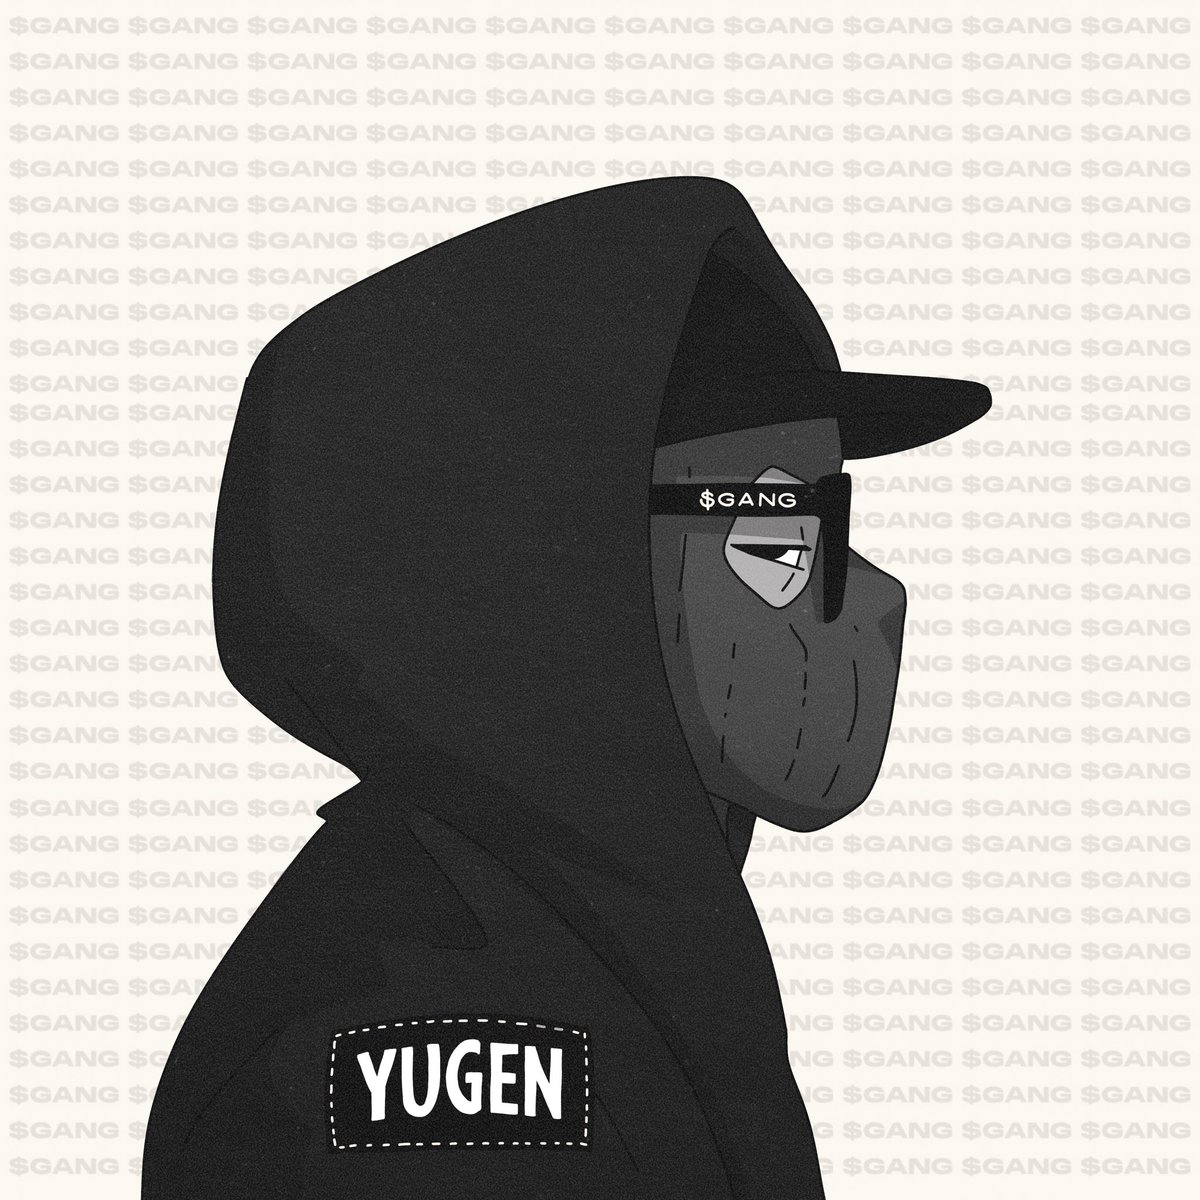 Not great at farming.. but I can draw instead.. Had lots of fun creating this one for the legend @YugenLBS $GANG $GANG